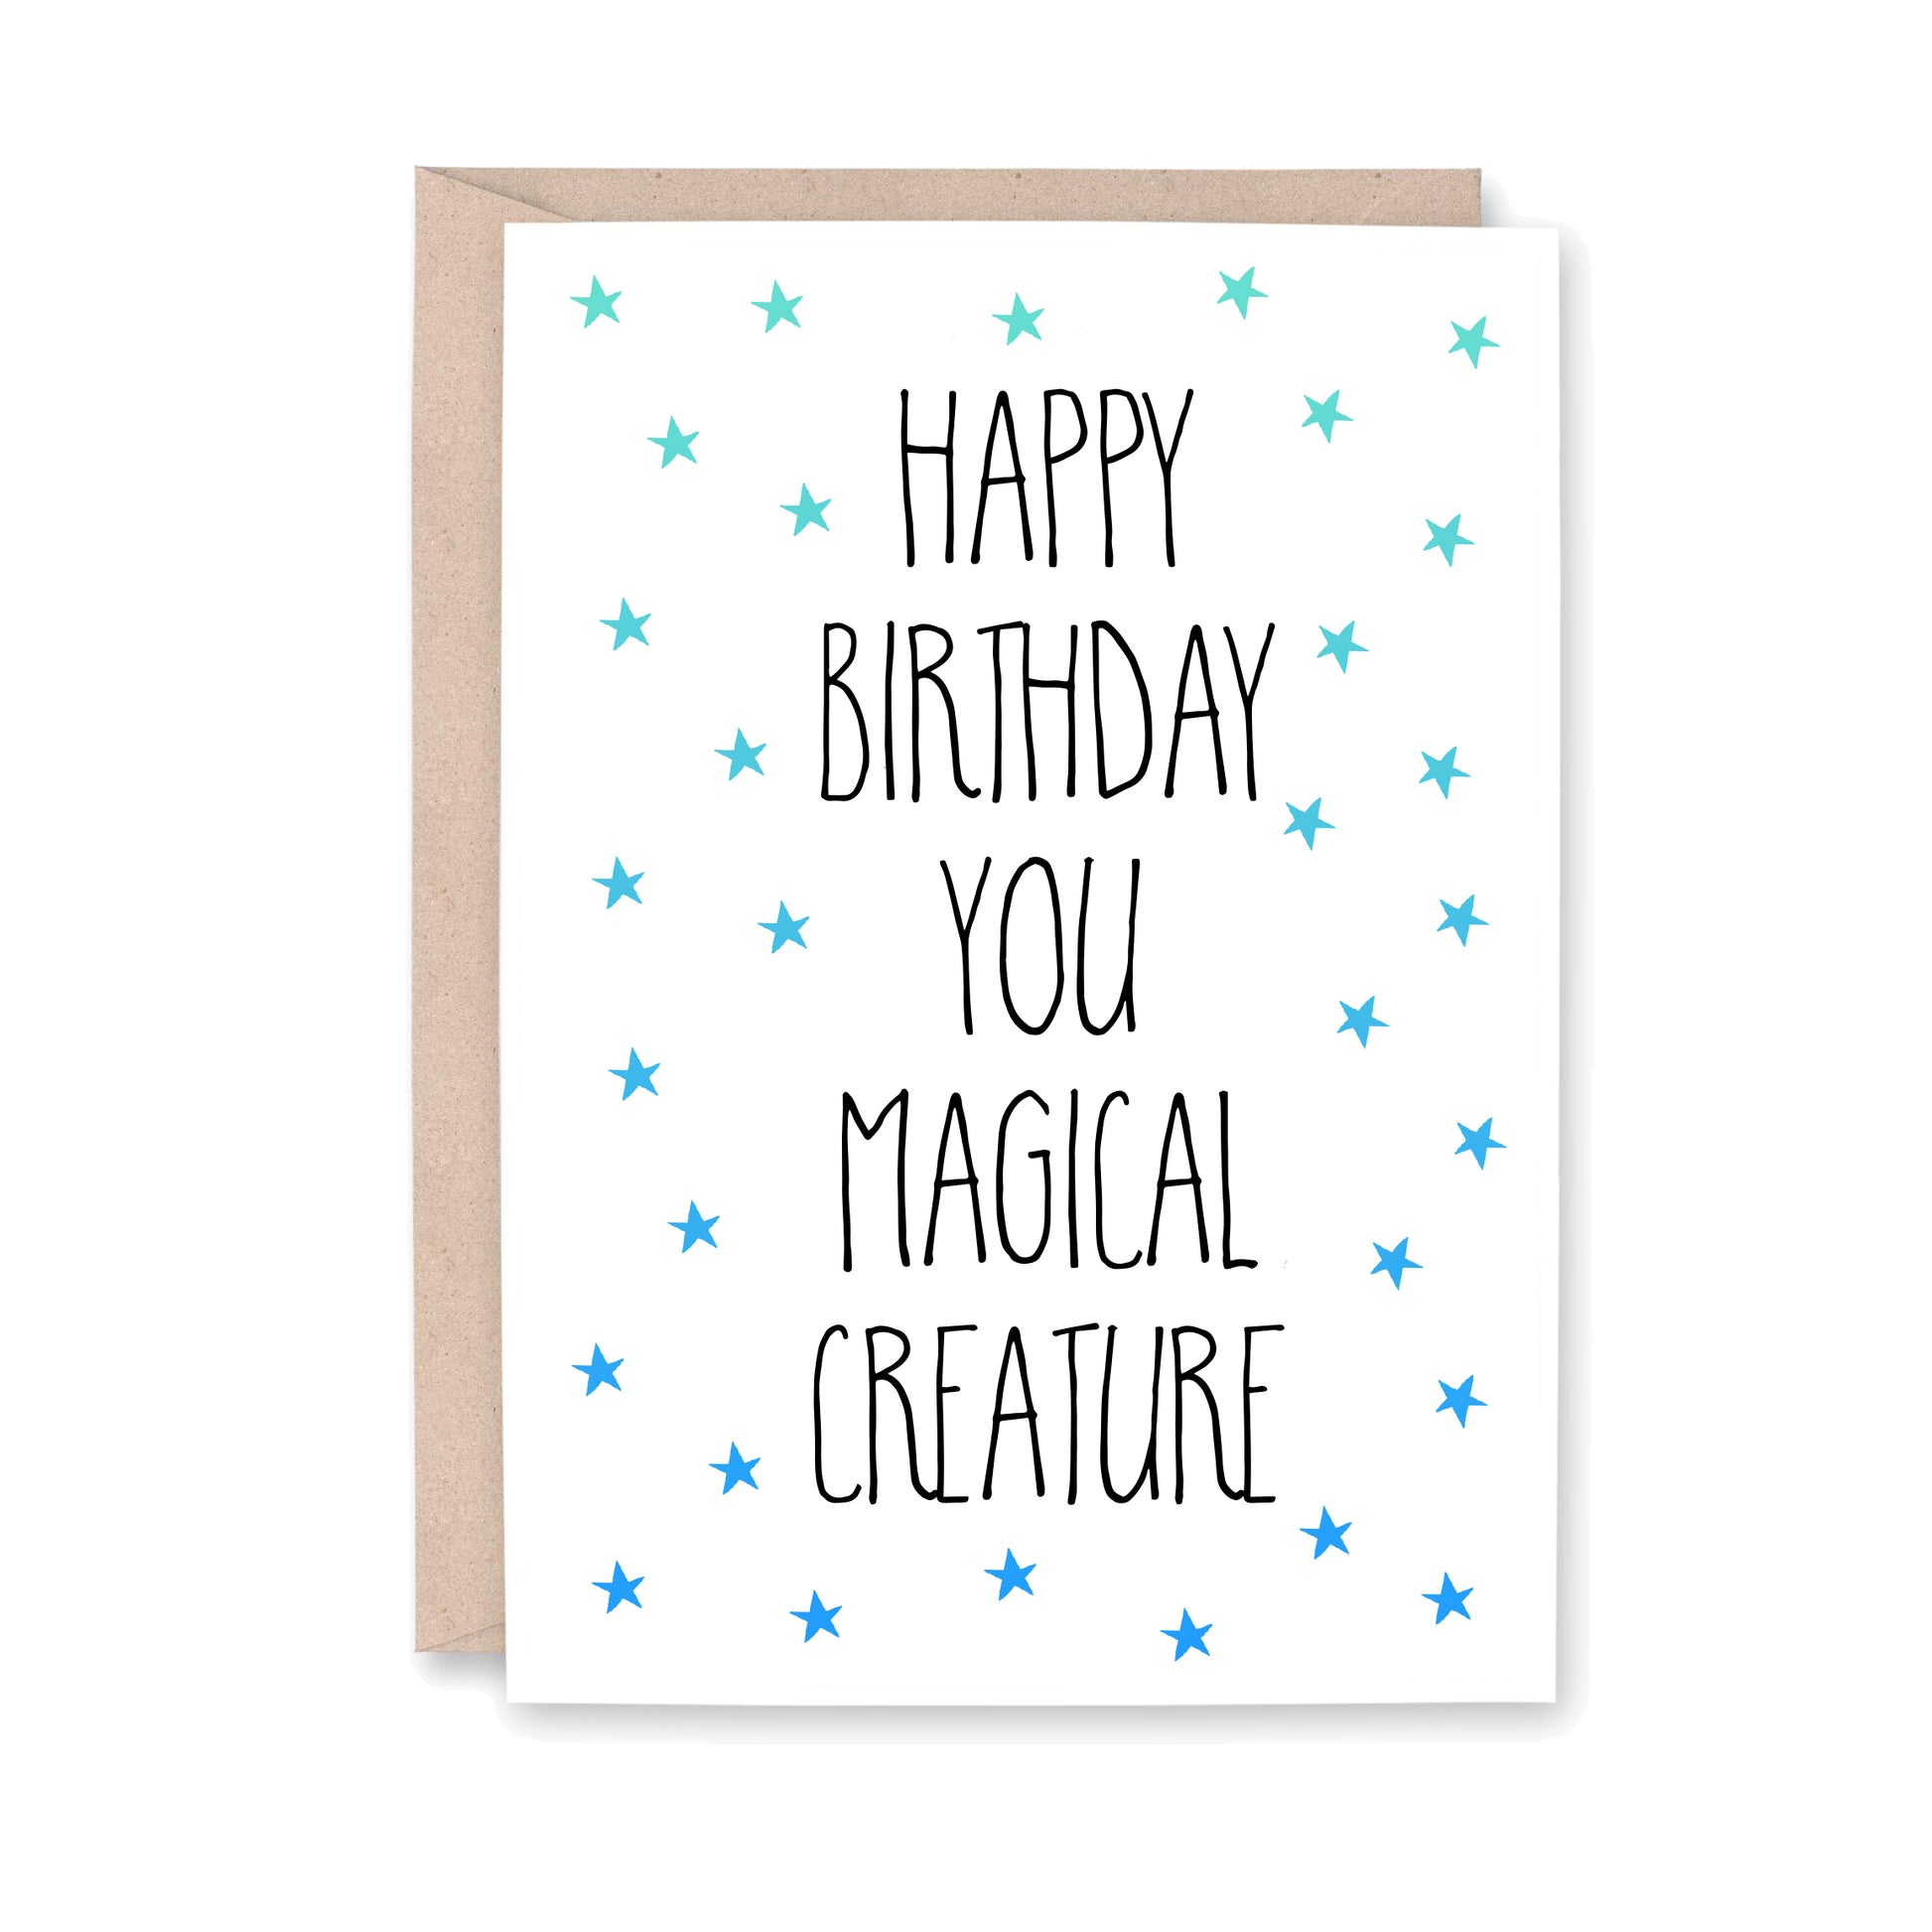 Happy Birthday you Magical Creature card with blue and green stars